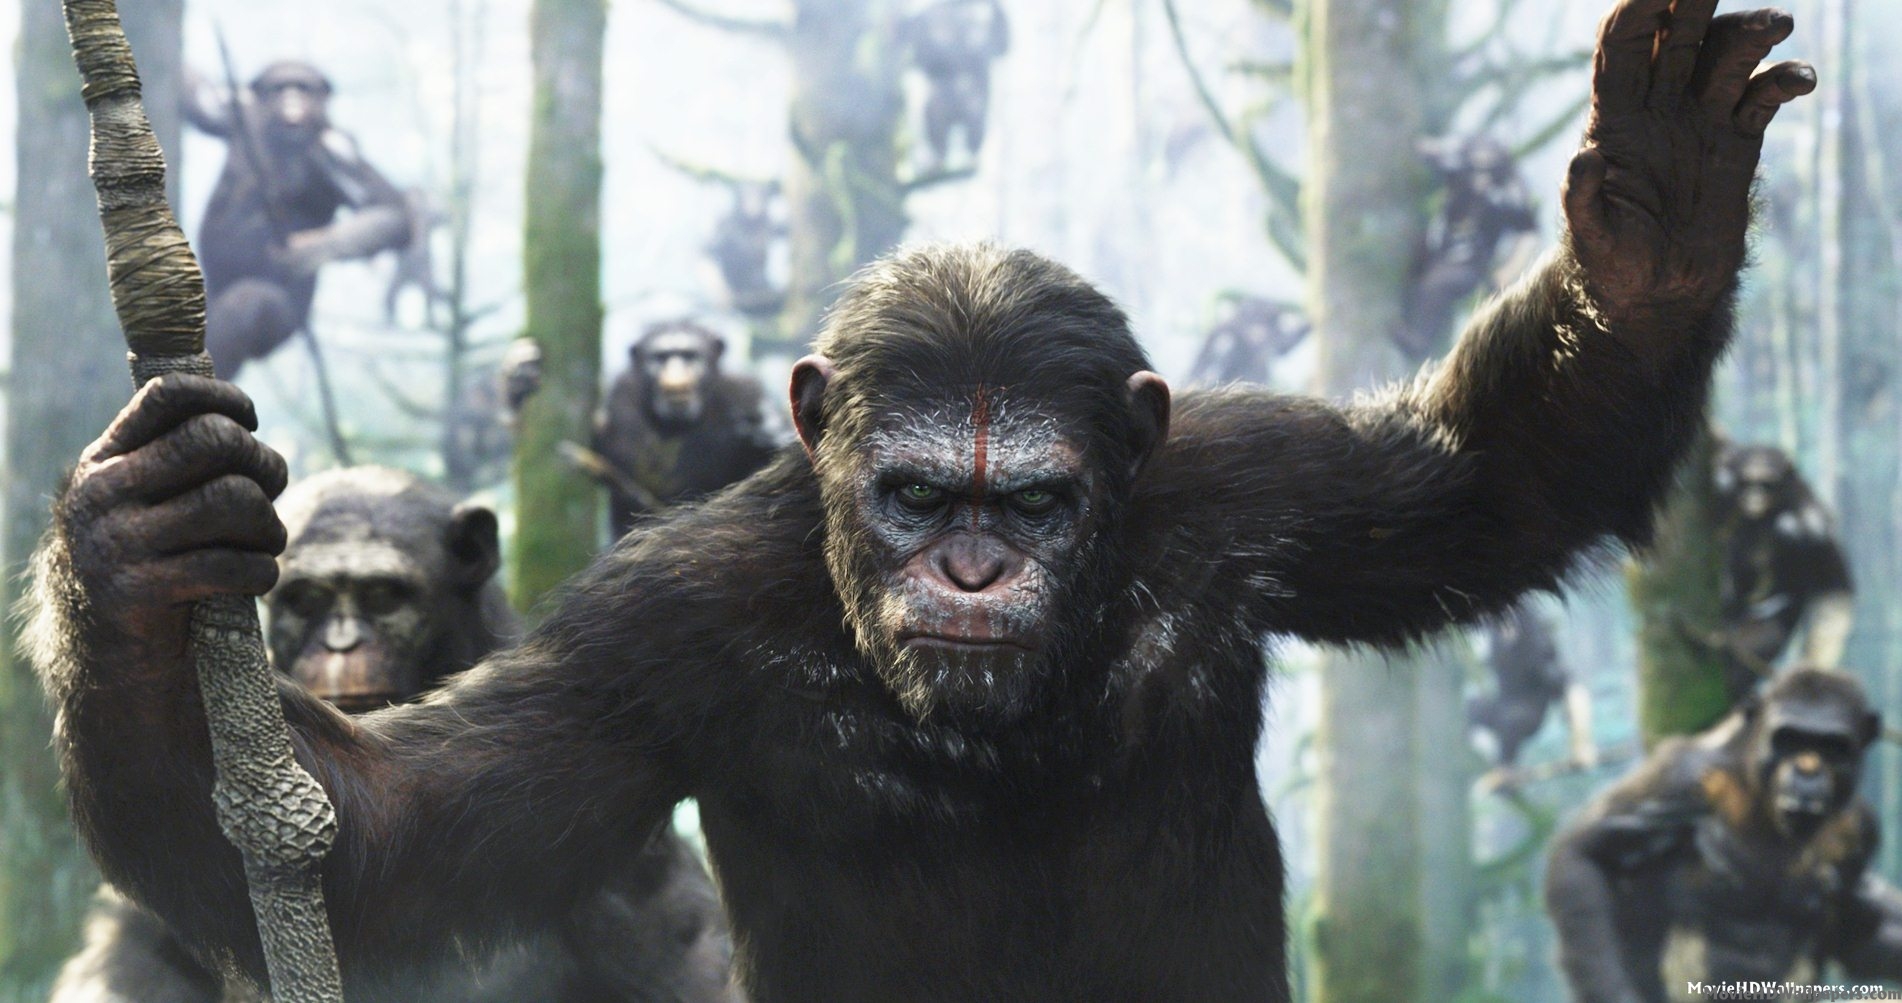 Dawn Of The Planet Of The Apes Backgrounds, Compatible - PC, Mobile, Gadgets| 1902x1003 px